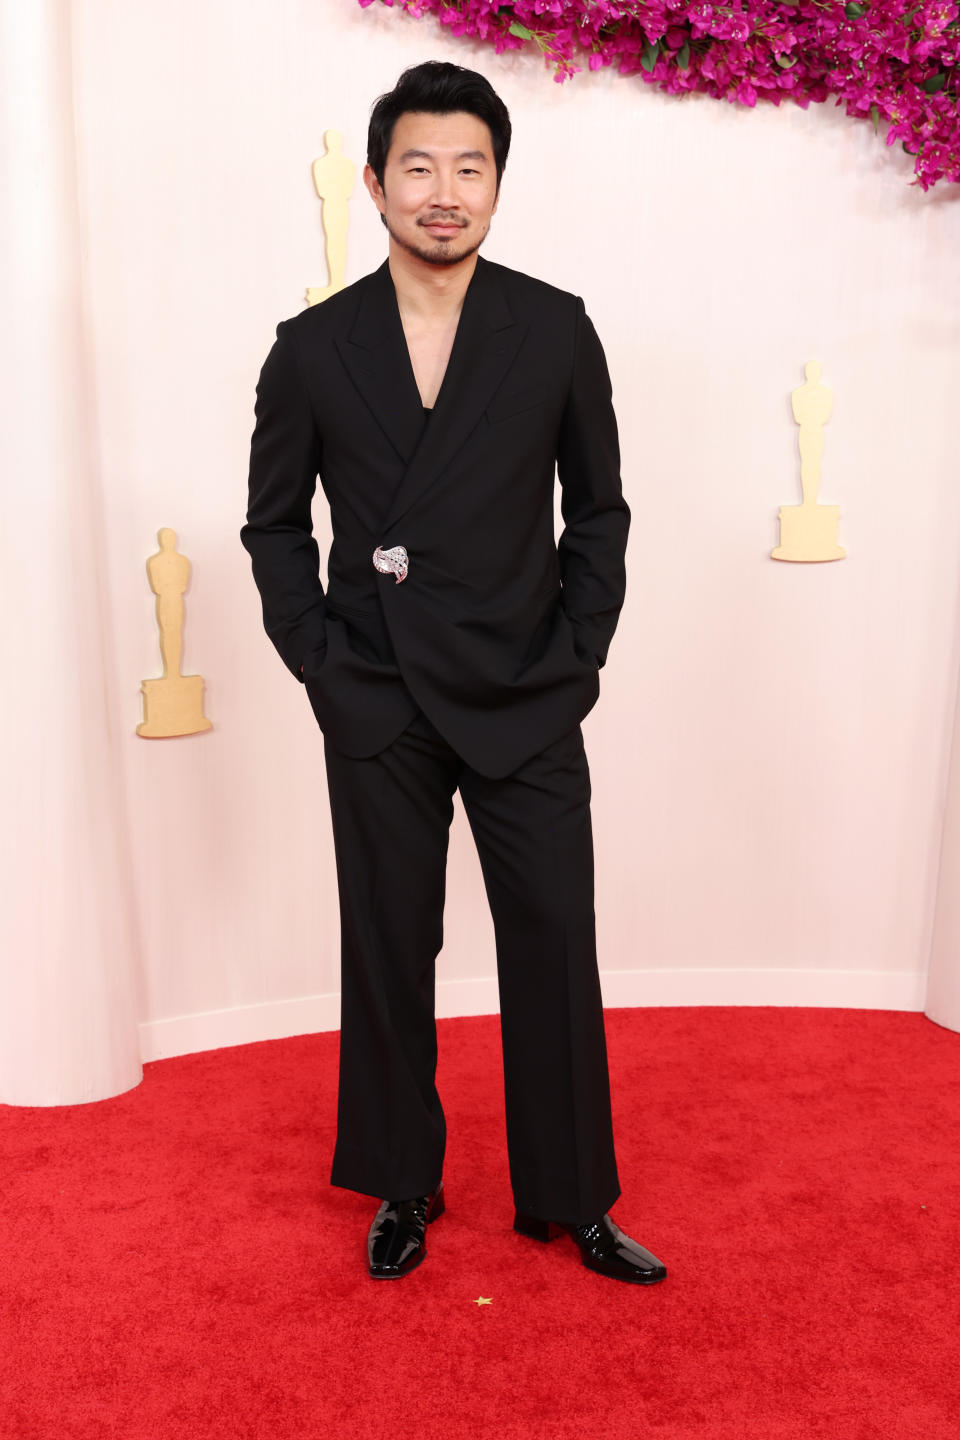 HOLLYWOOD, CALIFORNIA - MARCH 10: Simu Liu attends the 96th Annual Academy Awards on March 10, 2024 in Hollywood, California. (Photo by Kevin Mazur/Getty Images)